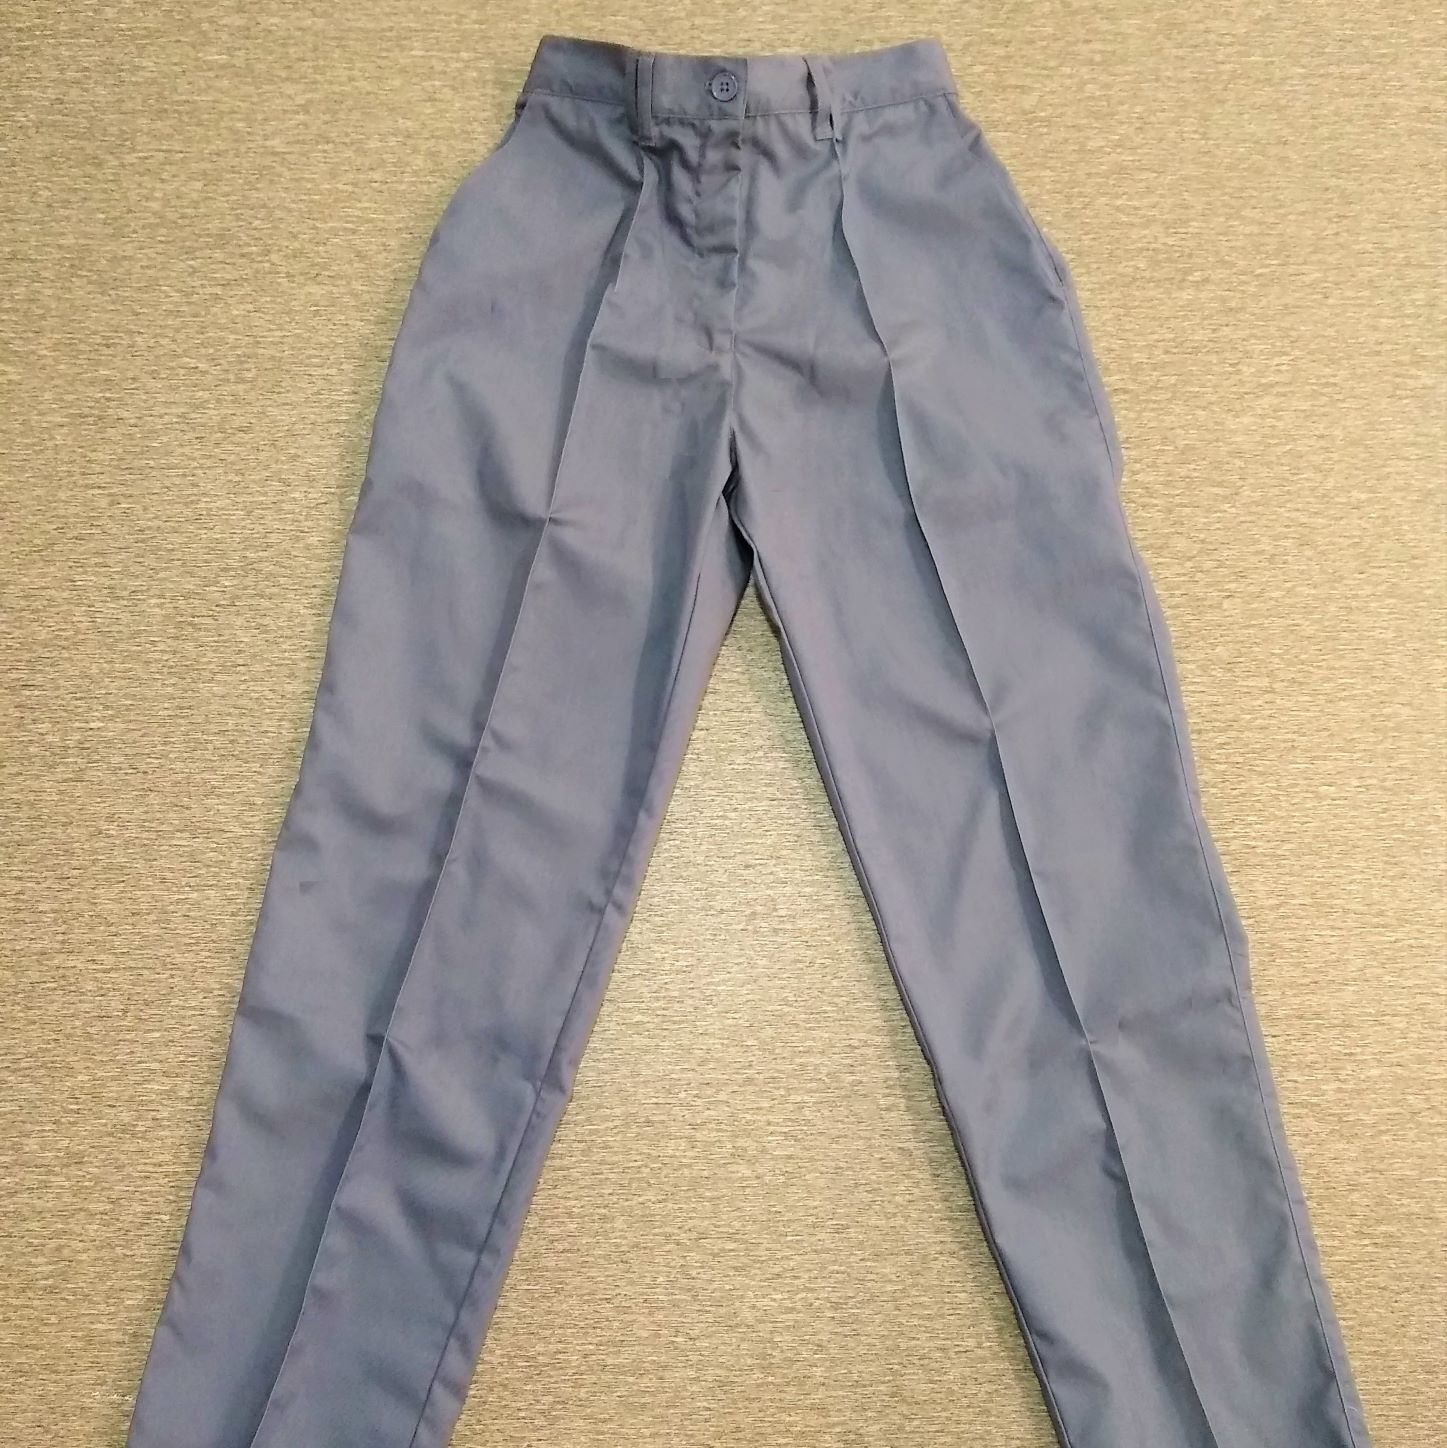 Midwifery Placement trousers